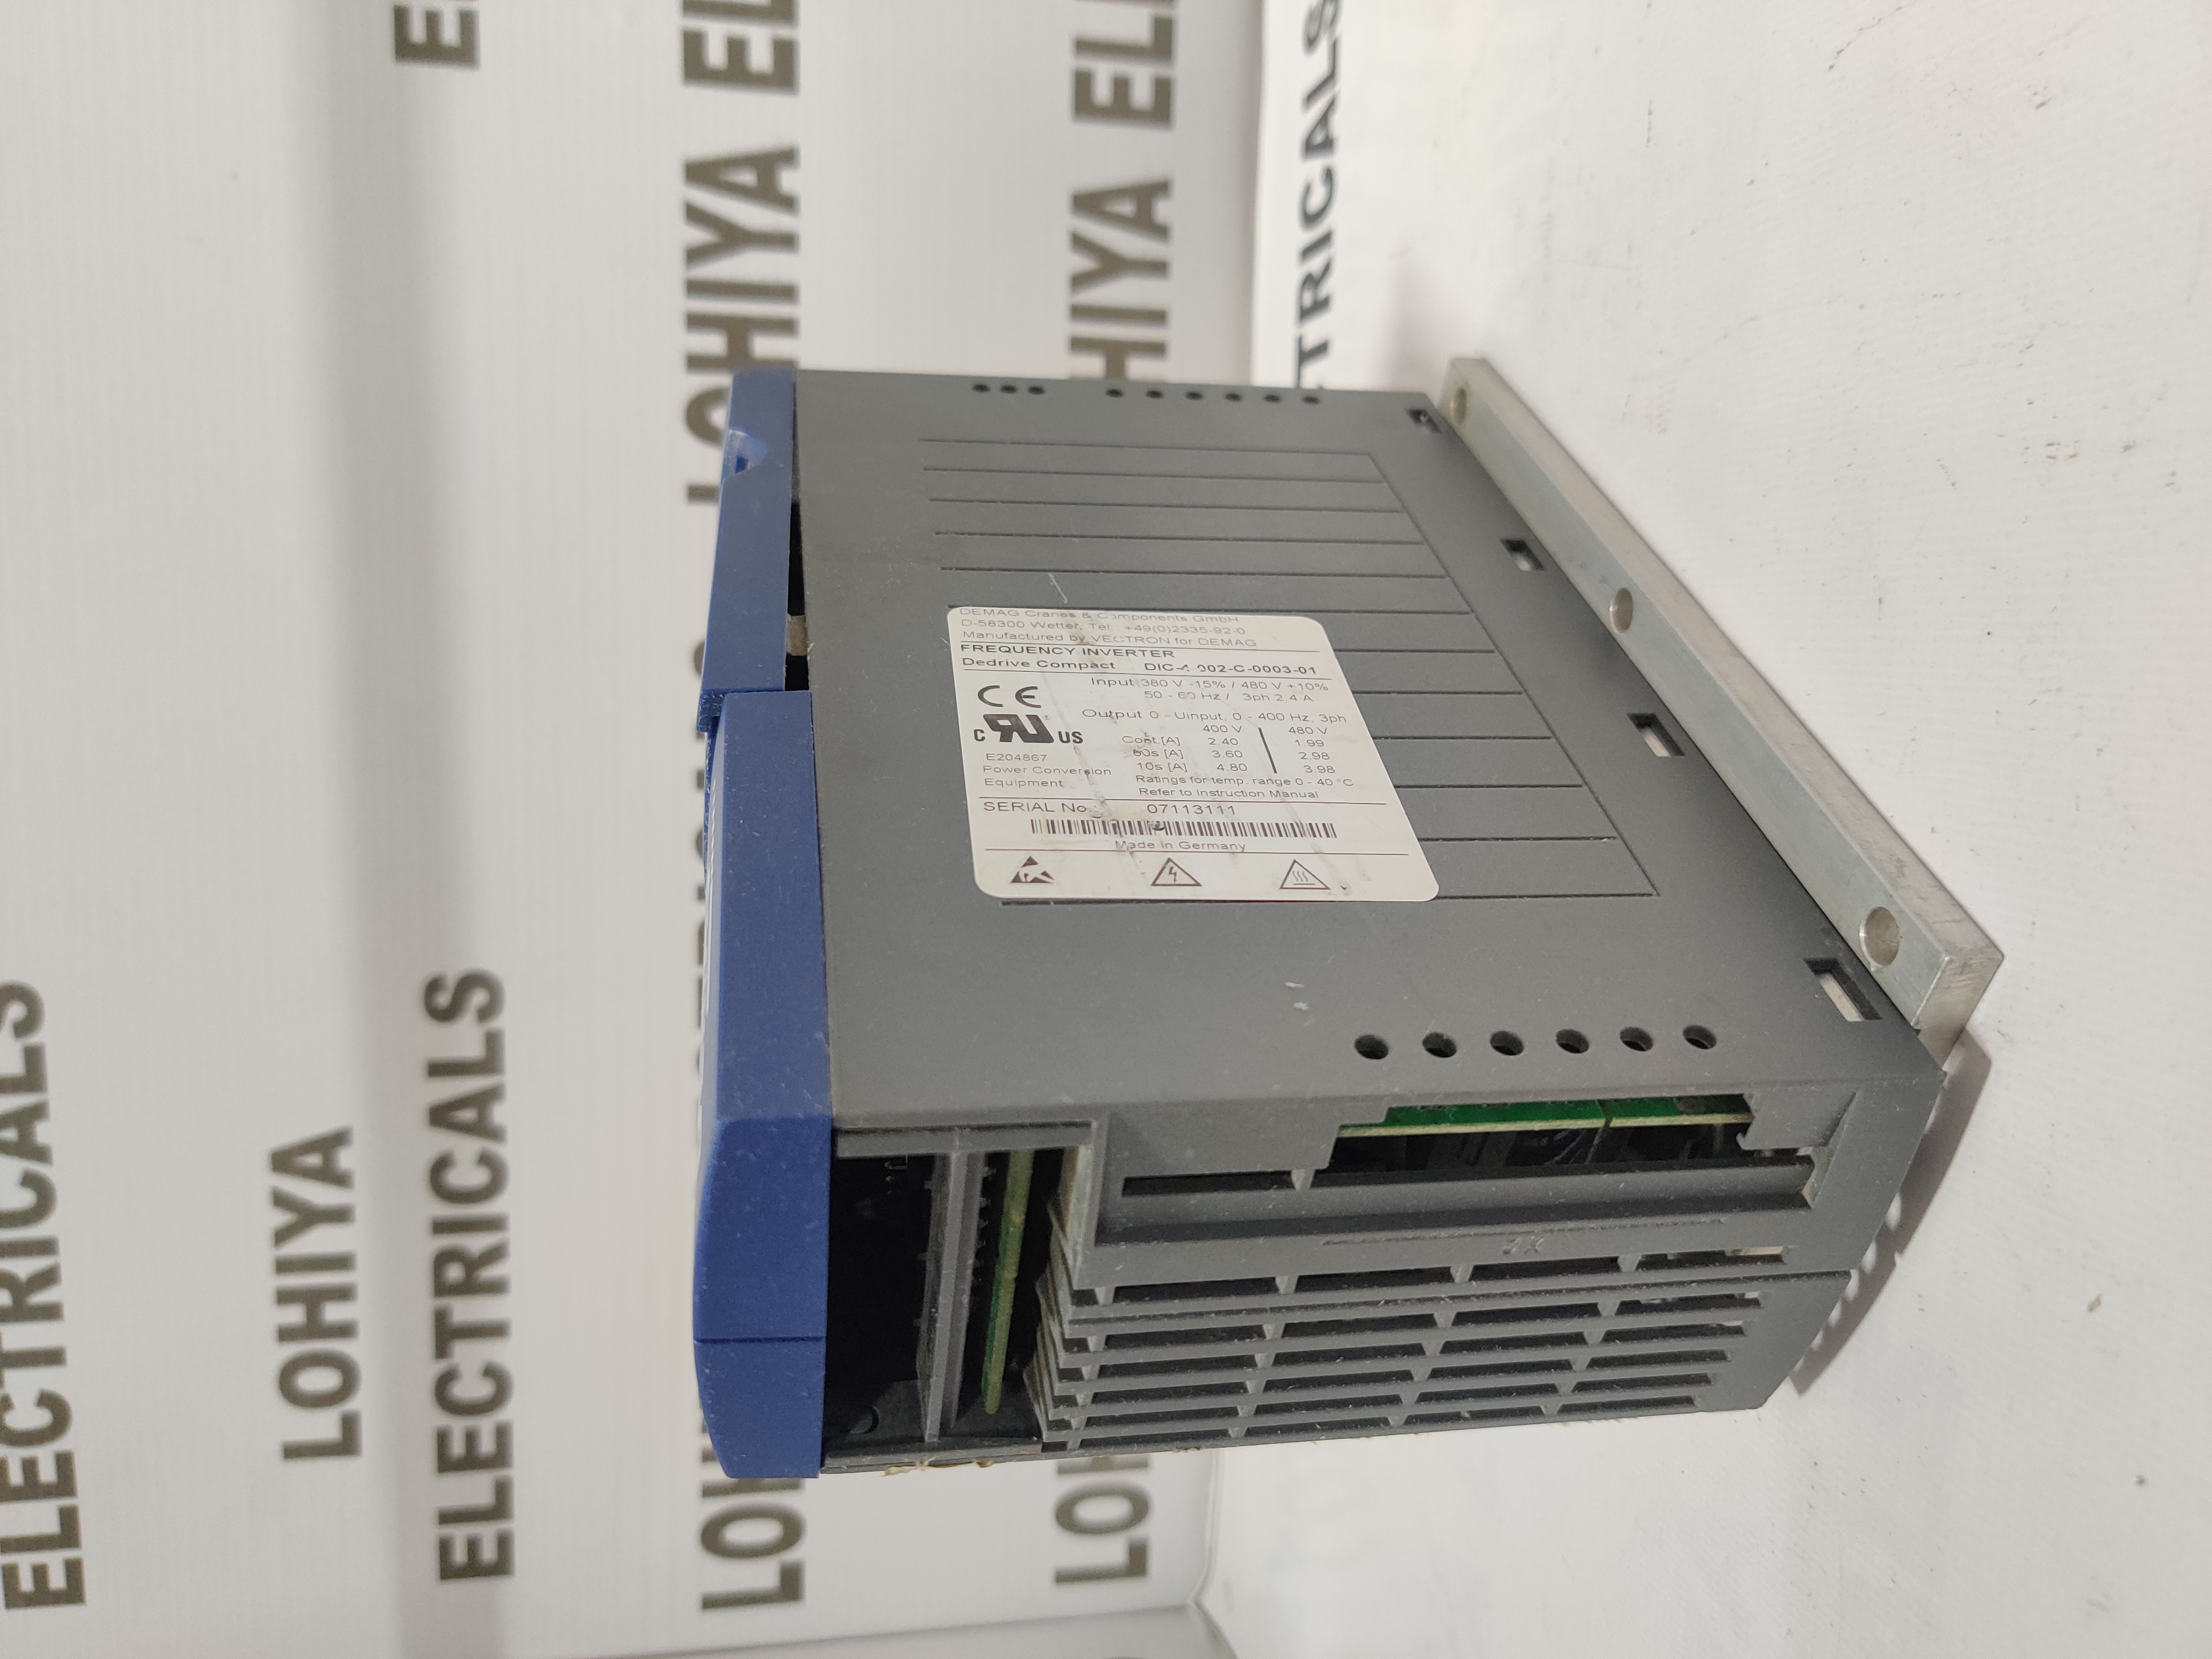 DEMAG DIC-4-002-C-0003-01 FREQUENCY INVERTER DRIVES